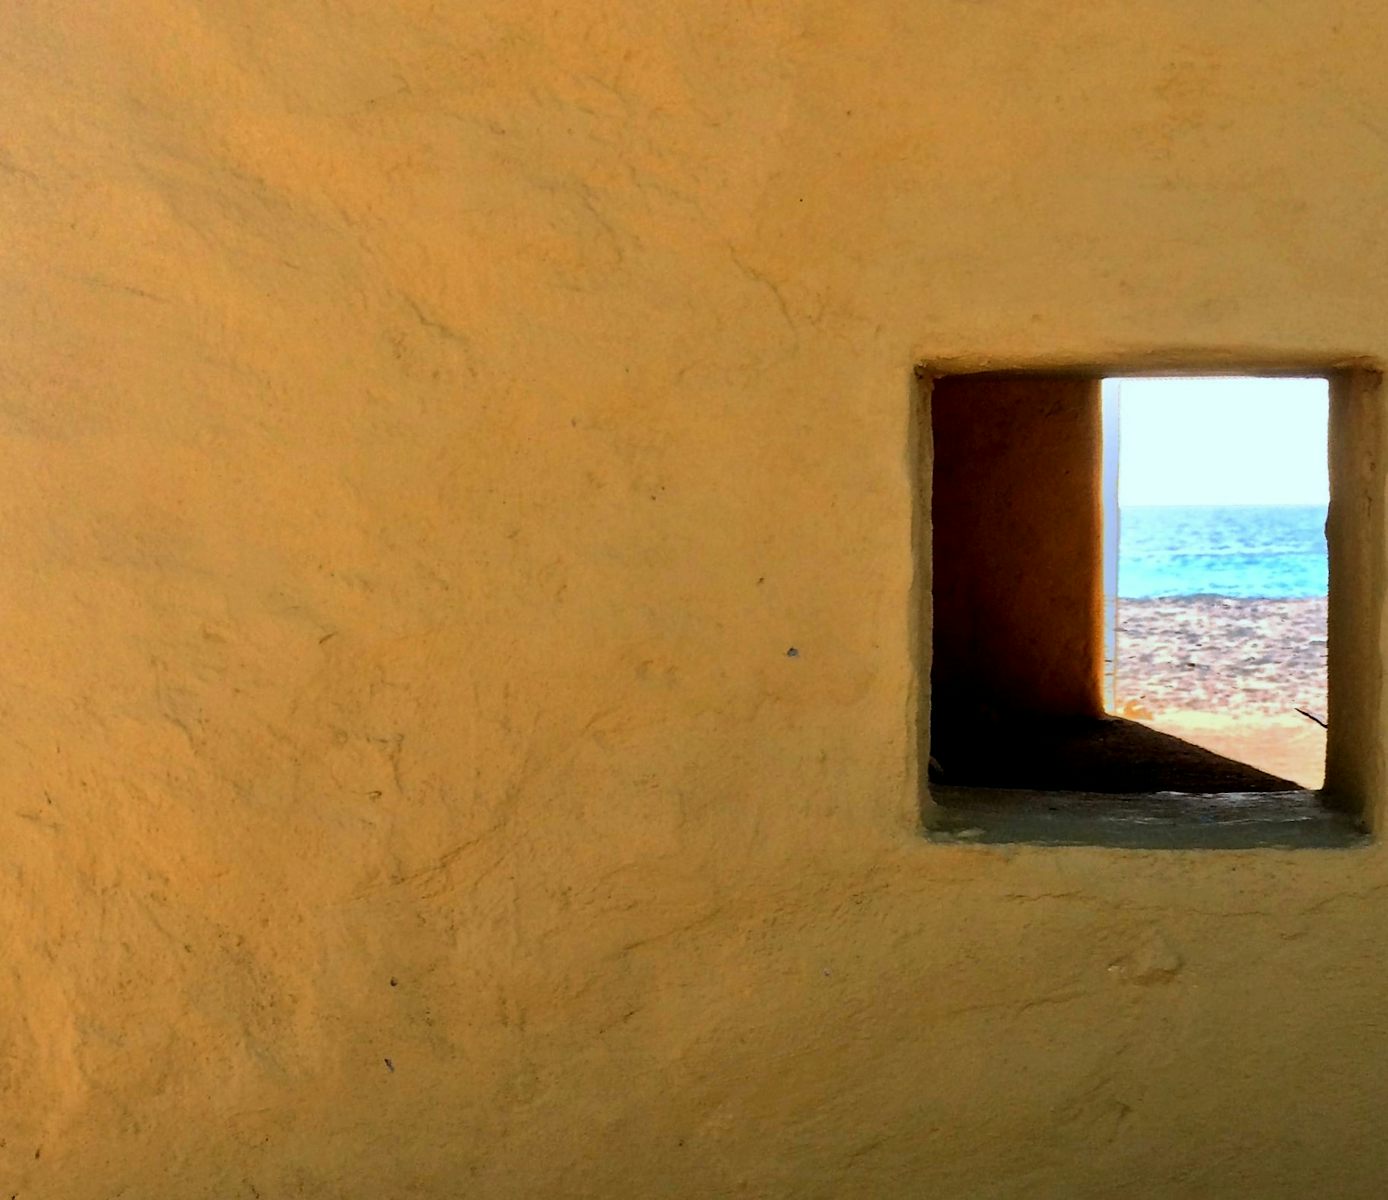 View through one of the slave huts on Bonaire.